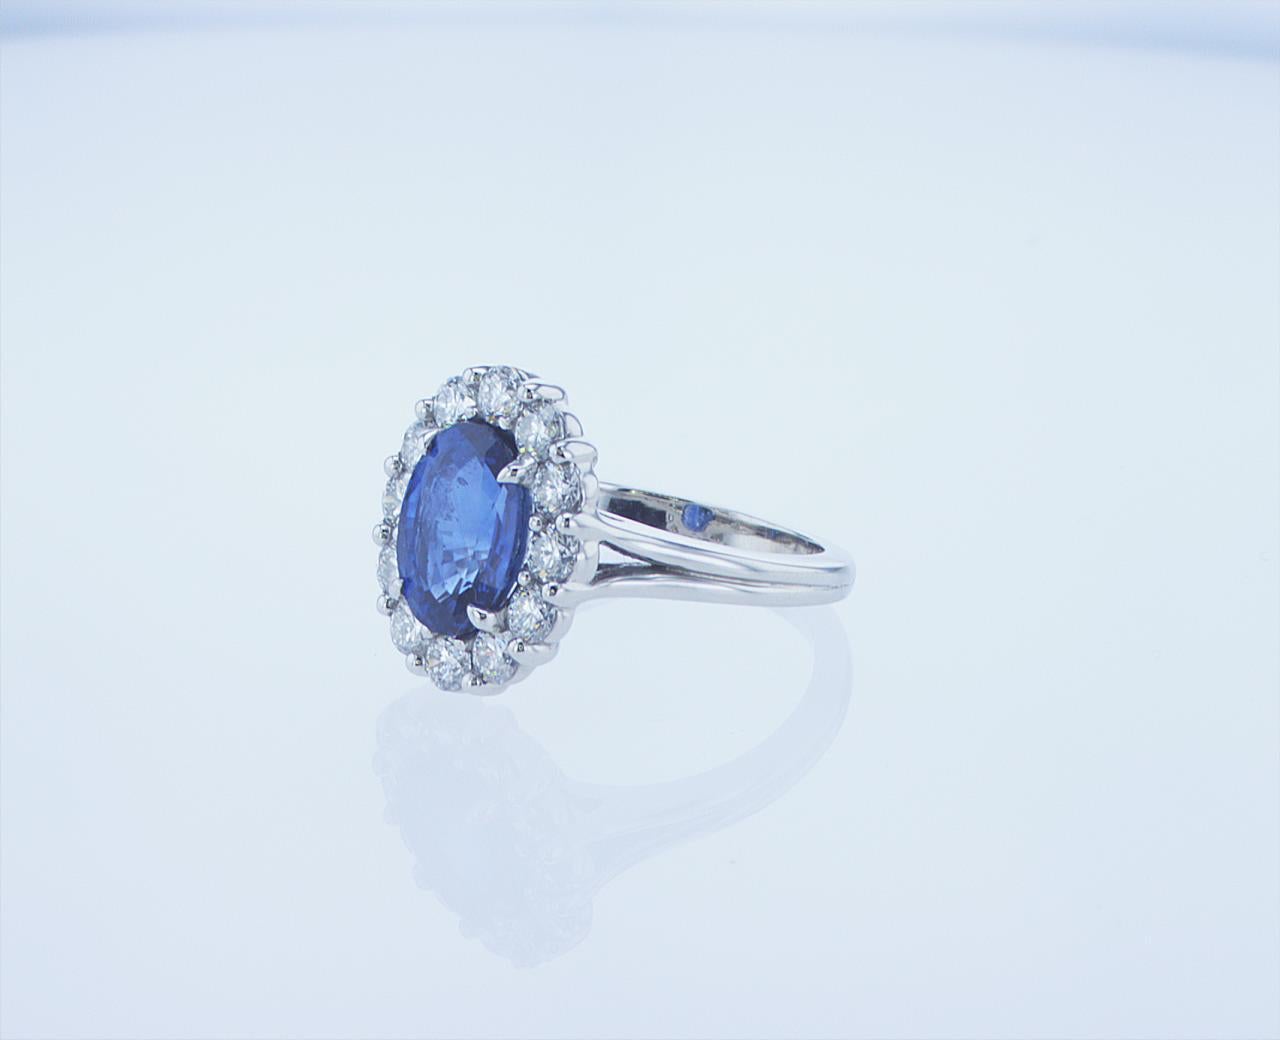 3.13ct GIA Certified Oval Sapphire (GIA Report #2165113056). Featuring 1.02 Carats total weight of G/H Color, VS Clarity Round Brlliant Diamonds around the Oval Sapphire. Plain, Split Platinum Shank.